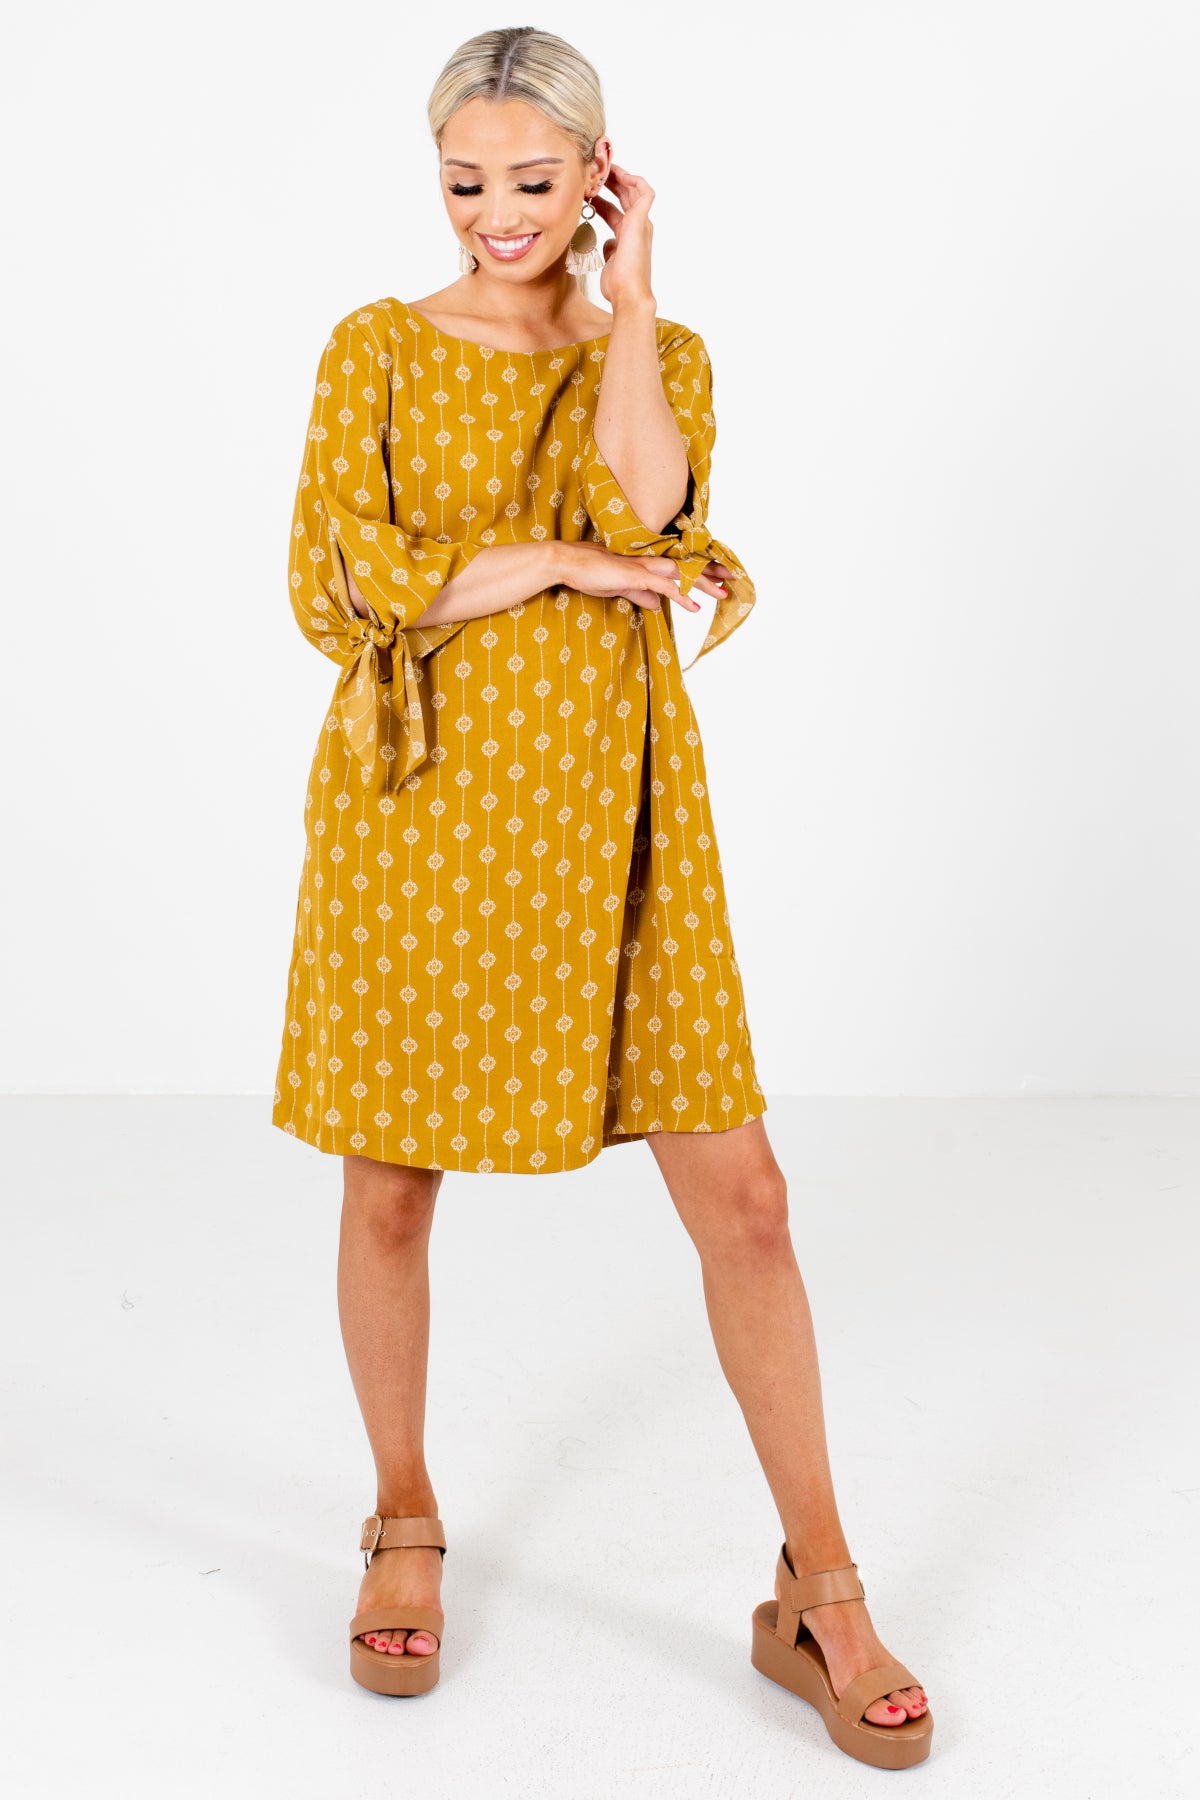 Women's Mustard Spring and Summertime Boutique Clothing